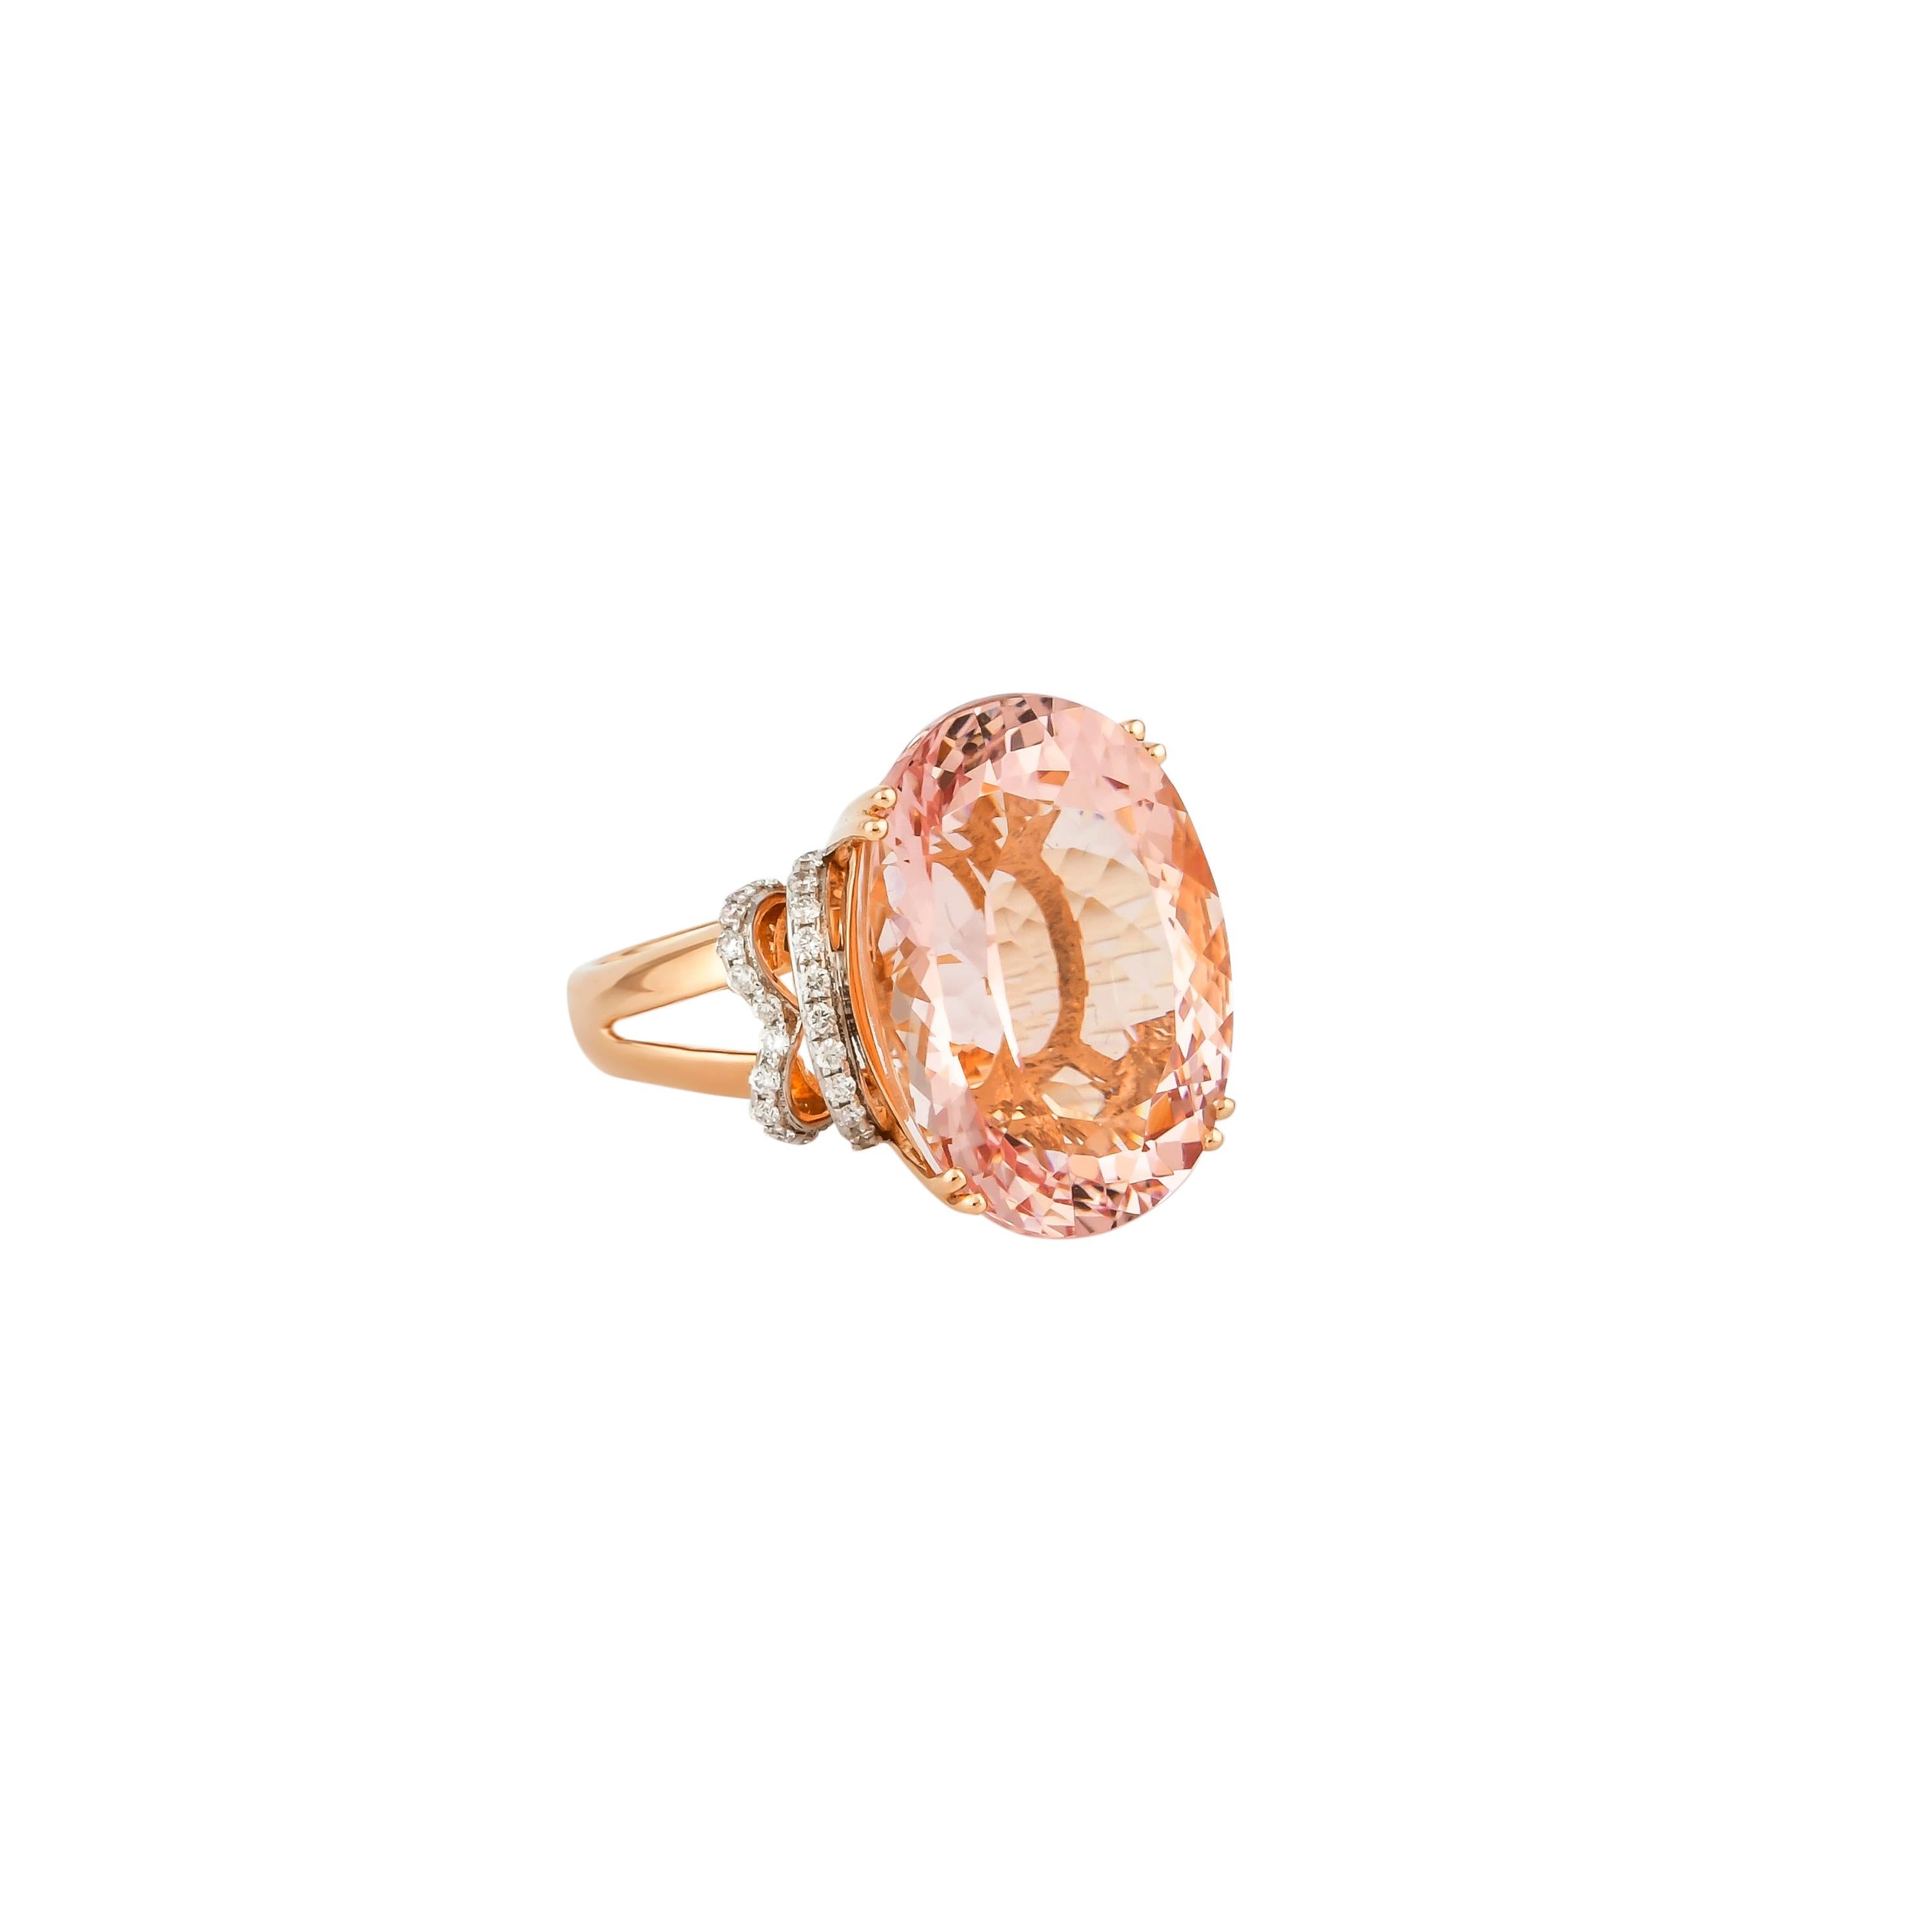 This collection features an array of magnificent morganites! Accented with diamonds these rings are made in rose gold and present a classic yet elegant look. 

Classic morganite ring in 18K rose gold with diamonds. 

Morganite: 15.29 carat oval